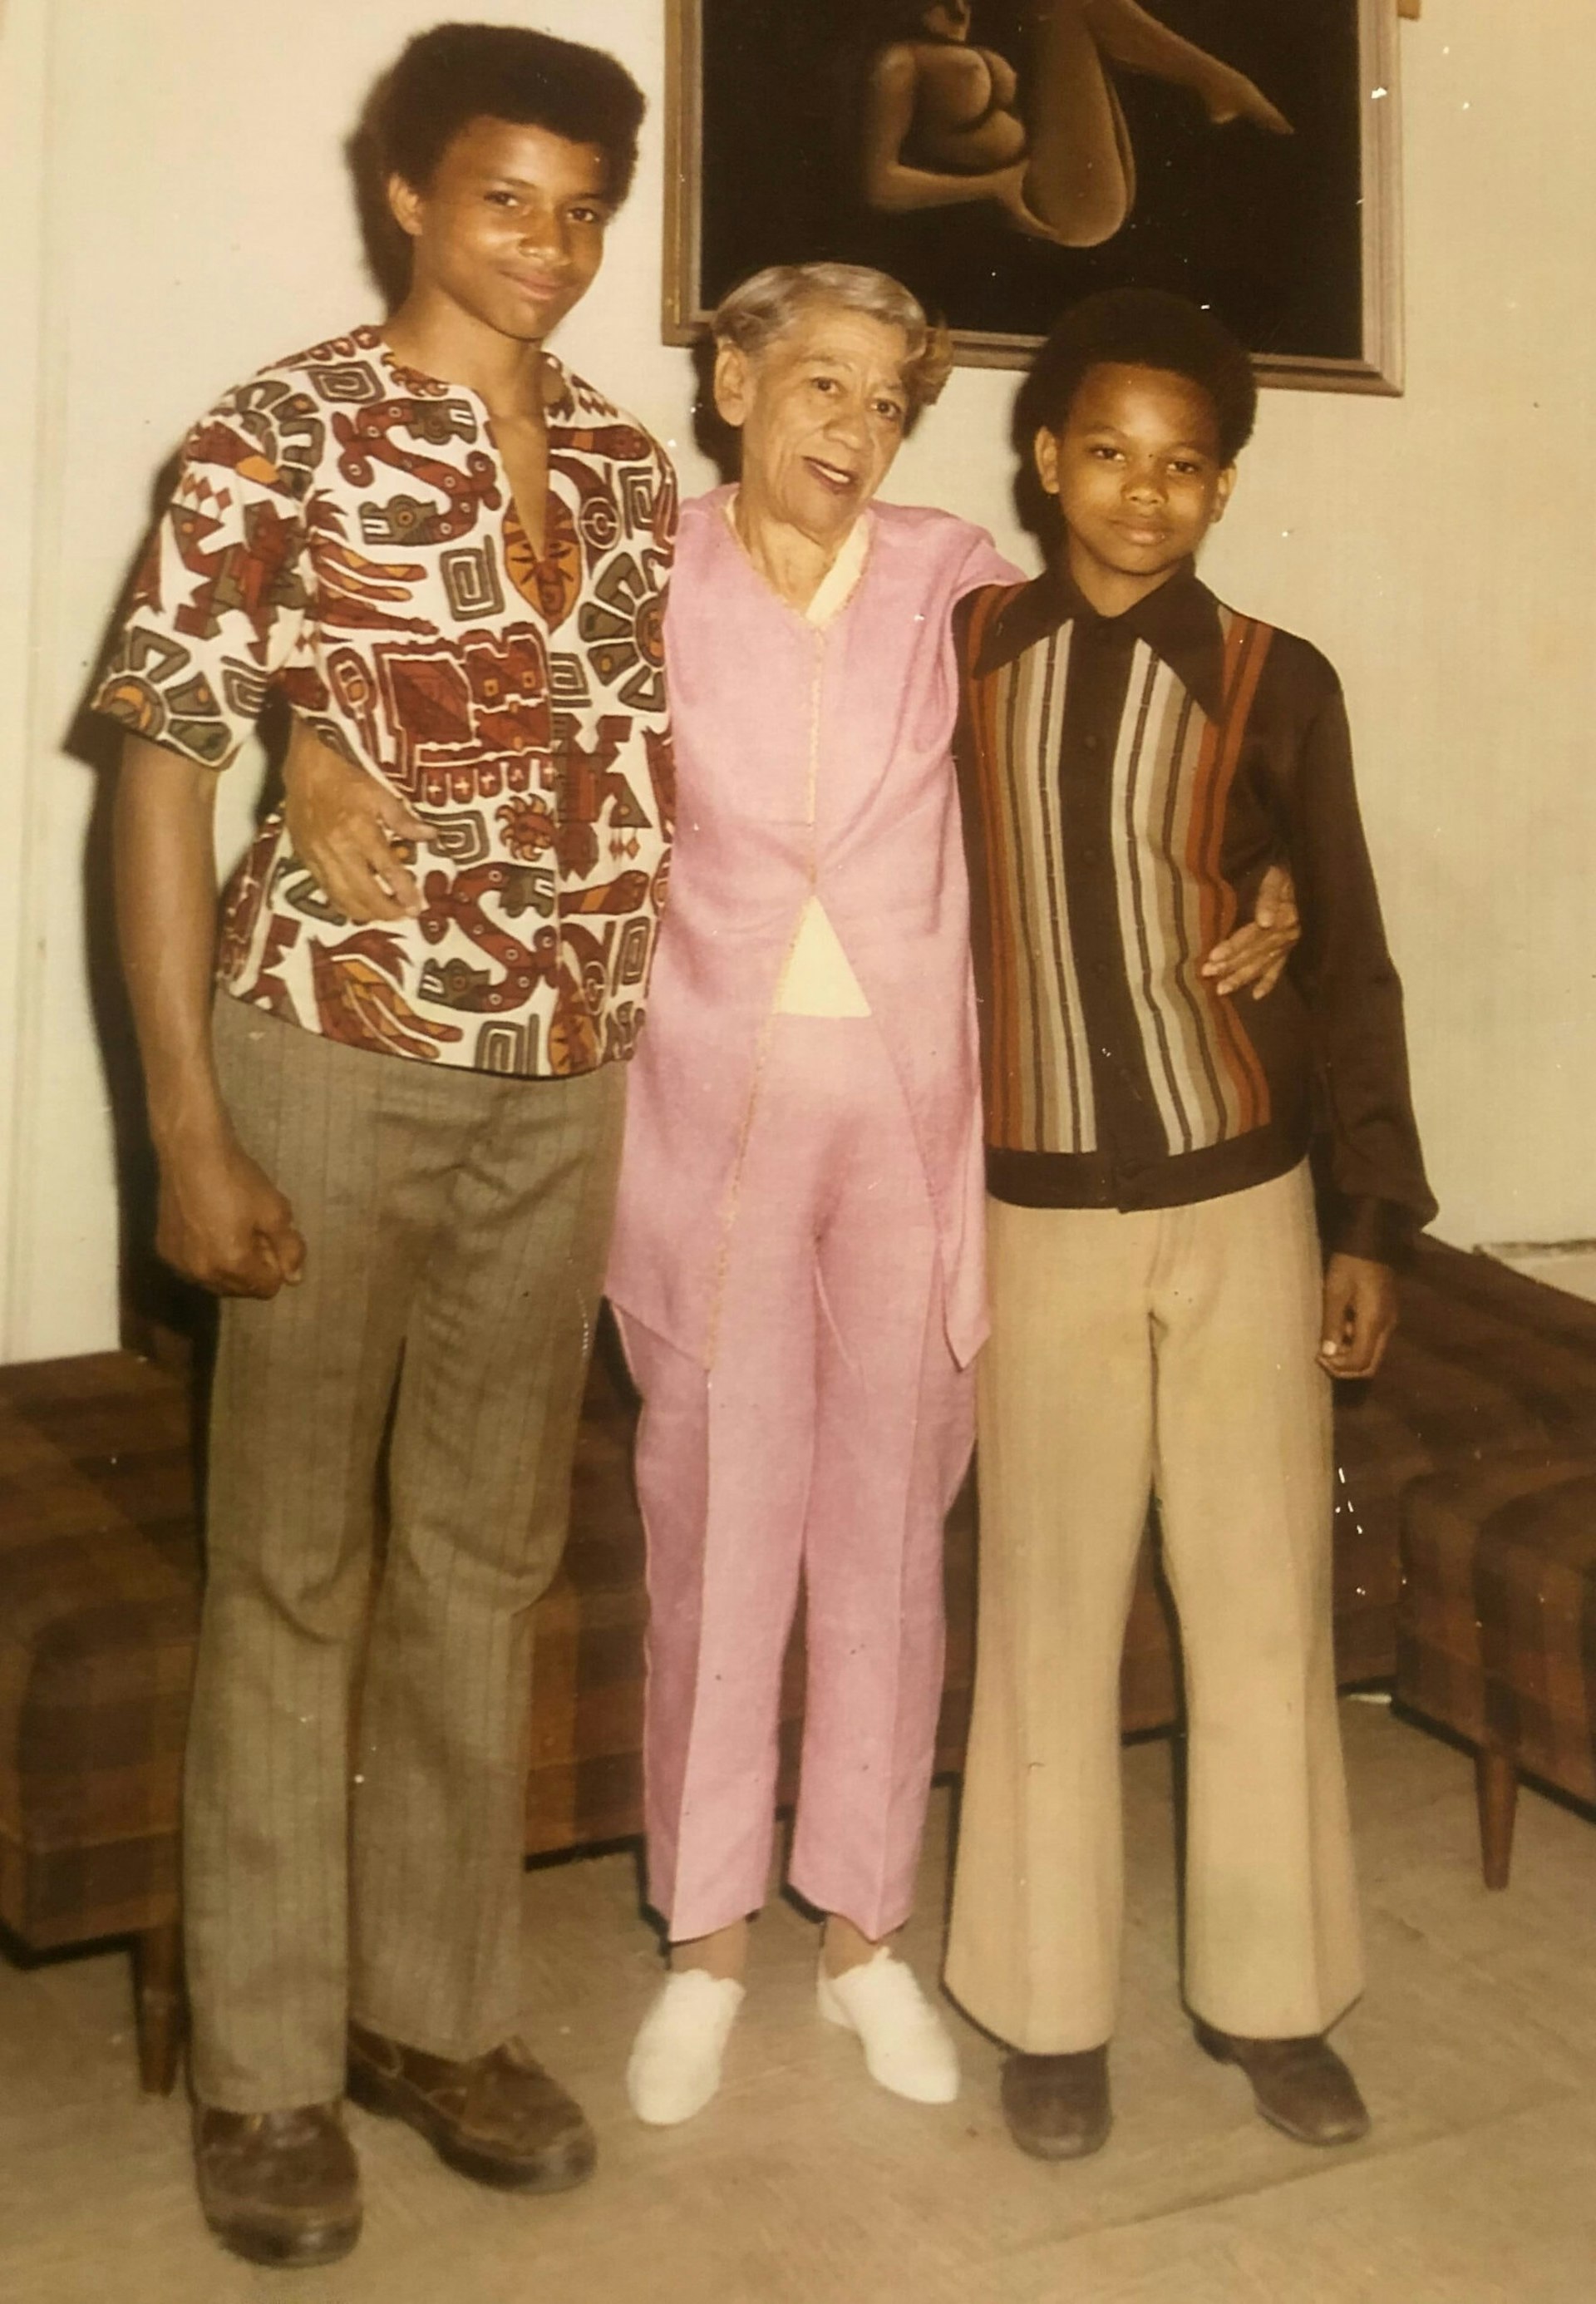 Andre Butler, as a teenager, poses with his grandmother and younger brother.